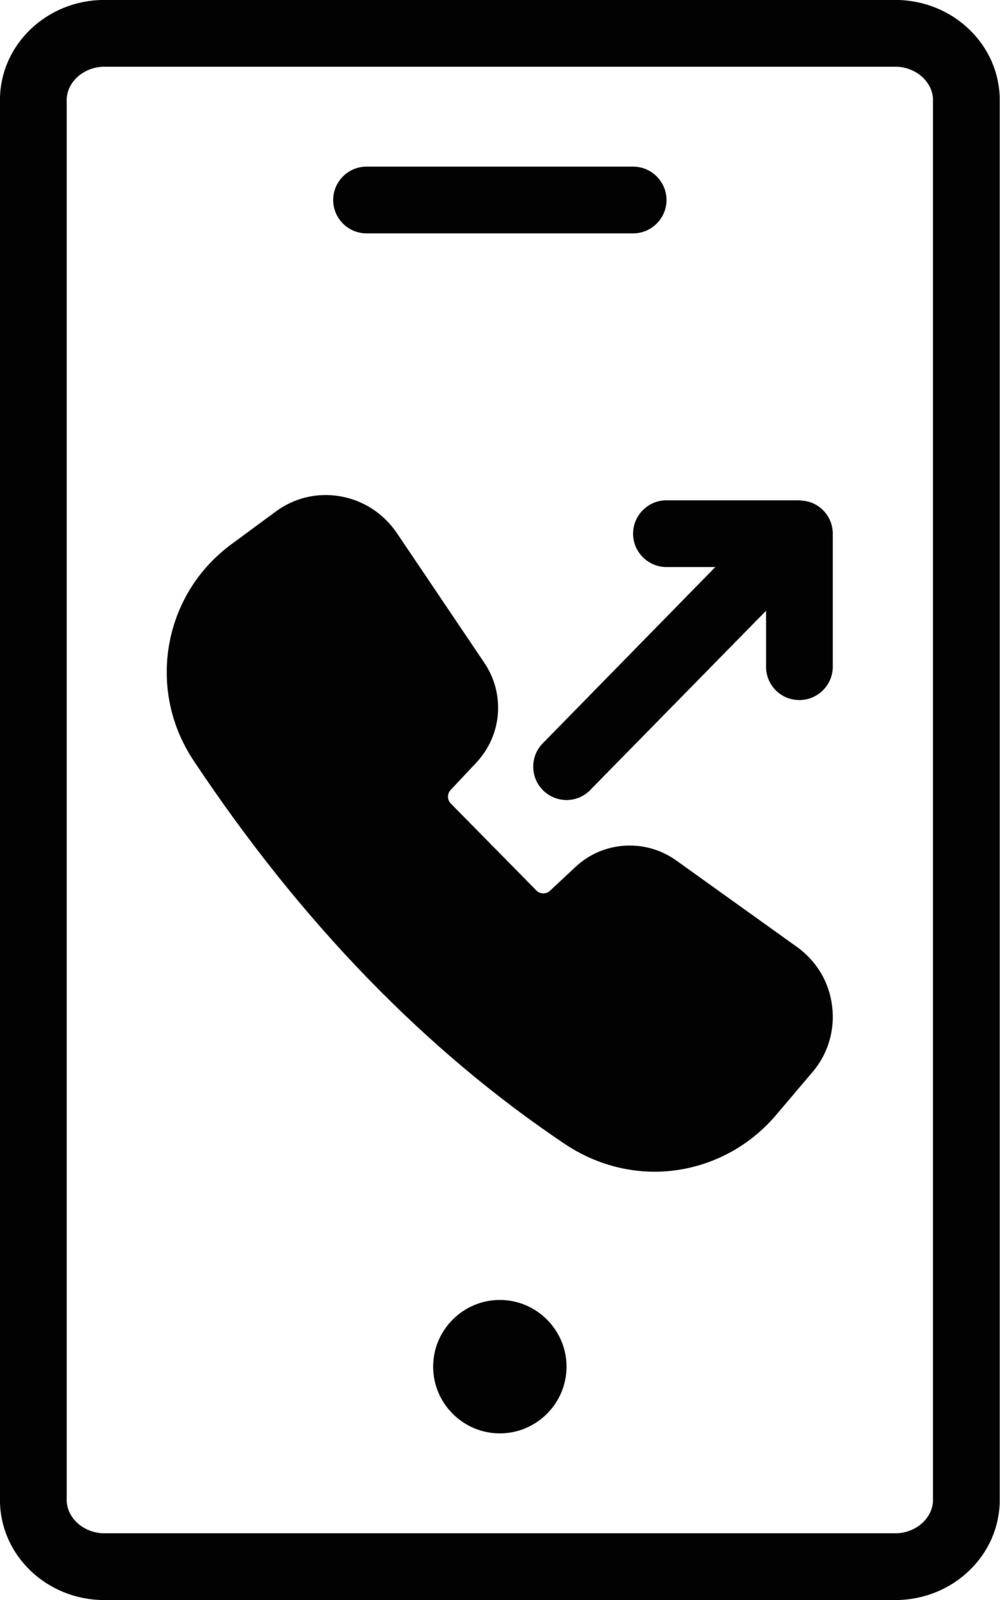 dial call Vector illustration on a transparent background. Premium quality symmbols. Glyphs vector icons for concept and graphic design.